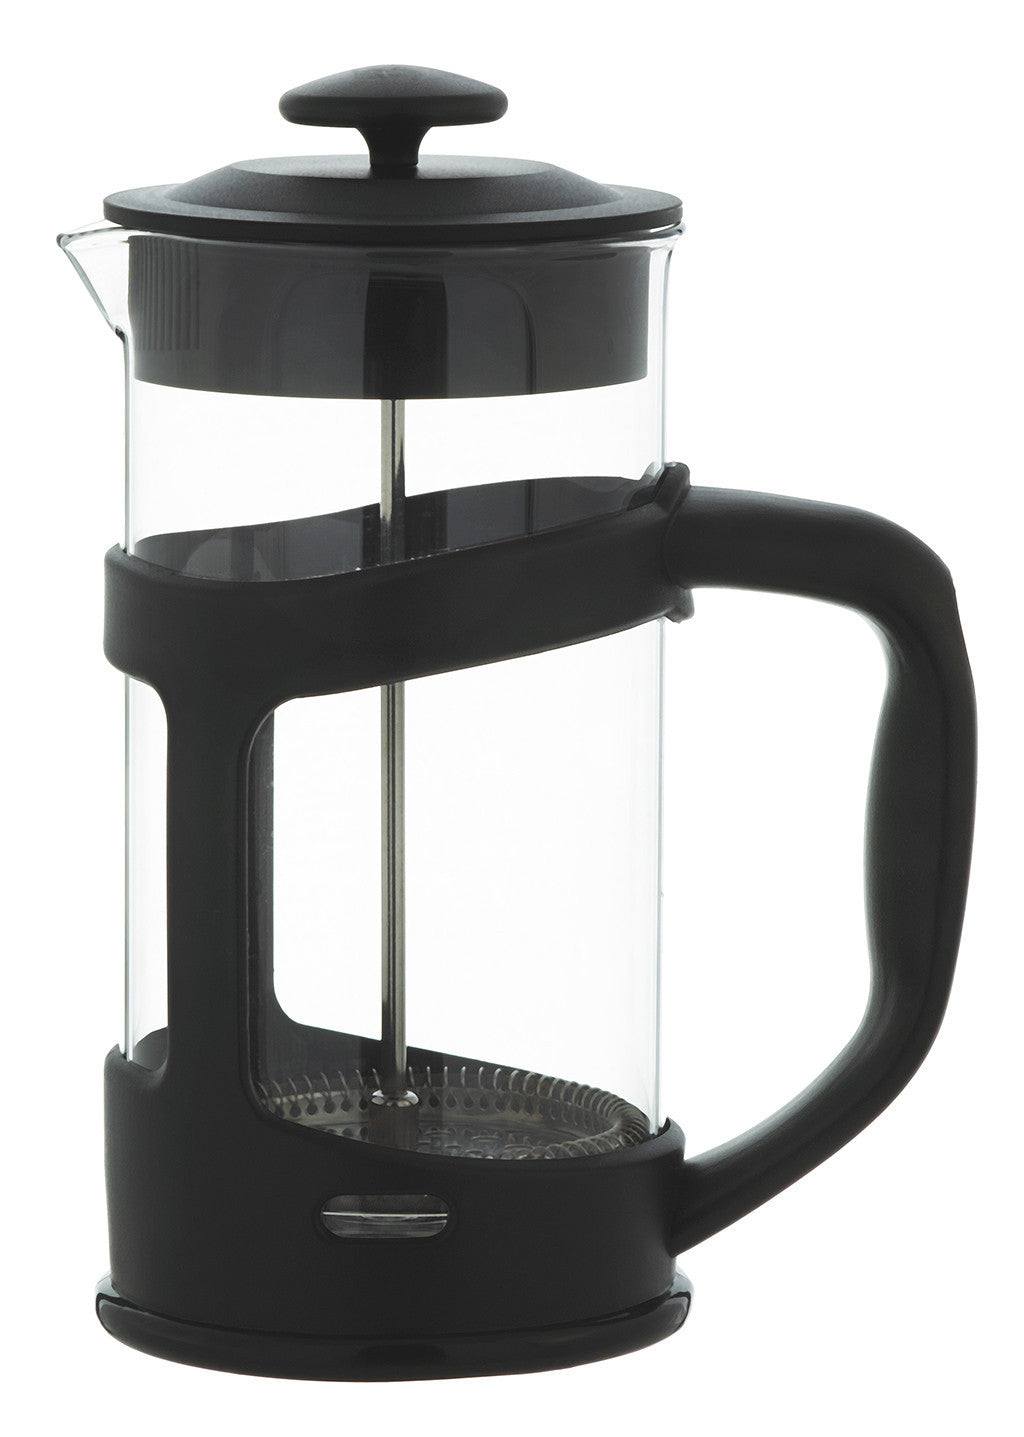 French Press: GROSCHE Basel - Black, available in 2 sizes